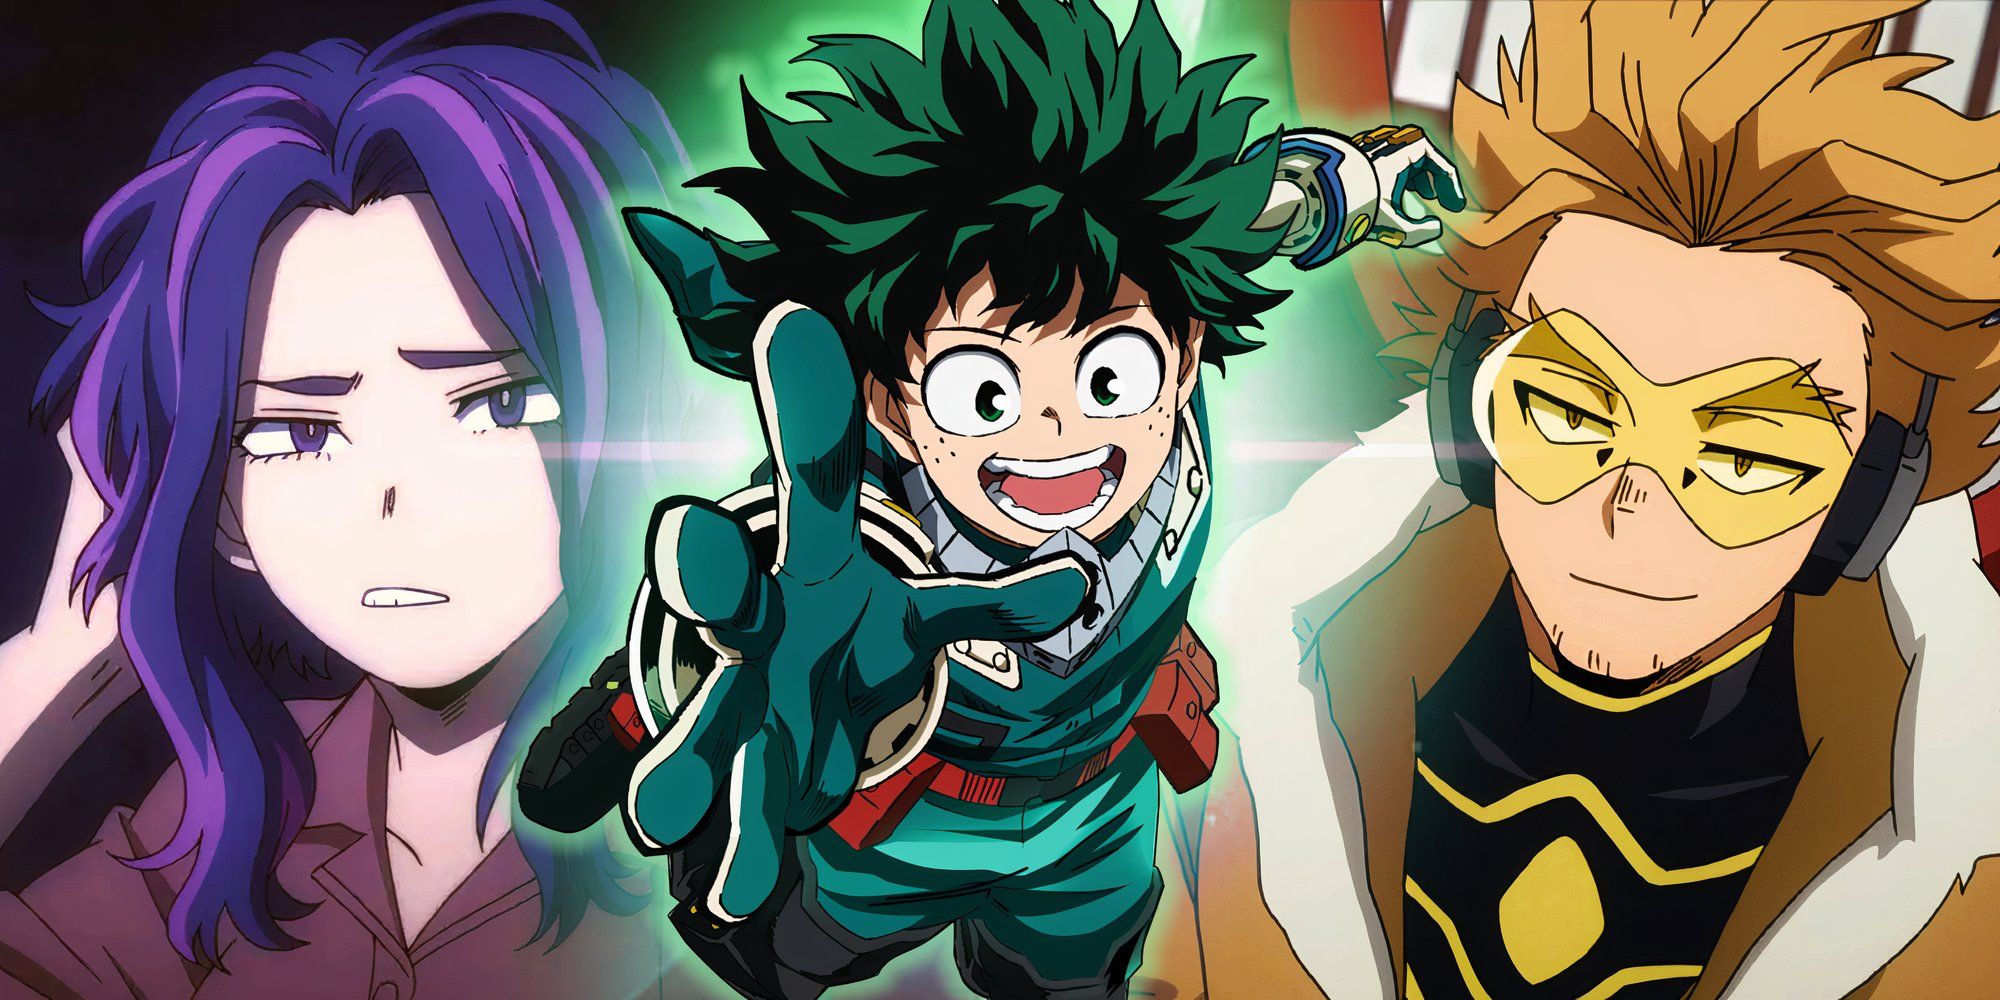 Deku from My Hero Academia looks happy and reaches out his hand, with Lady Nagant visible in the background on the left and hawks on the right.